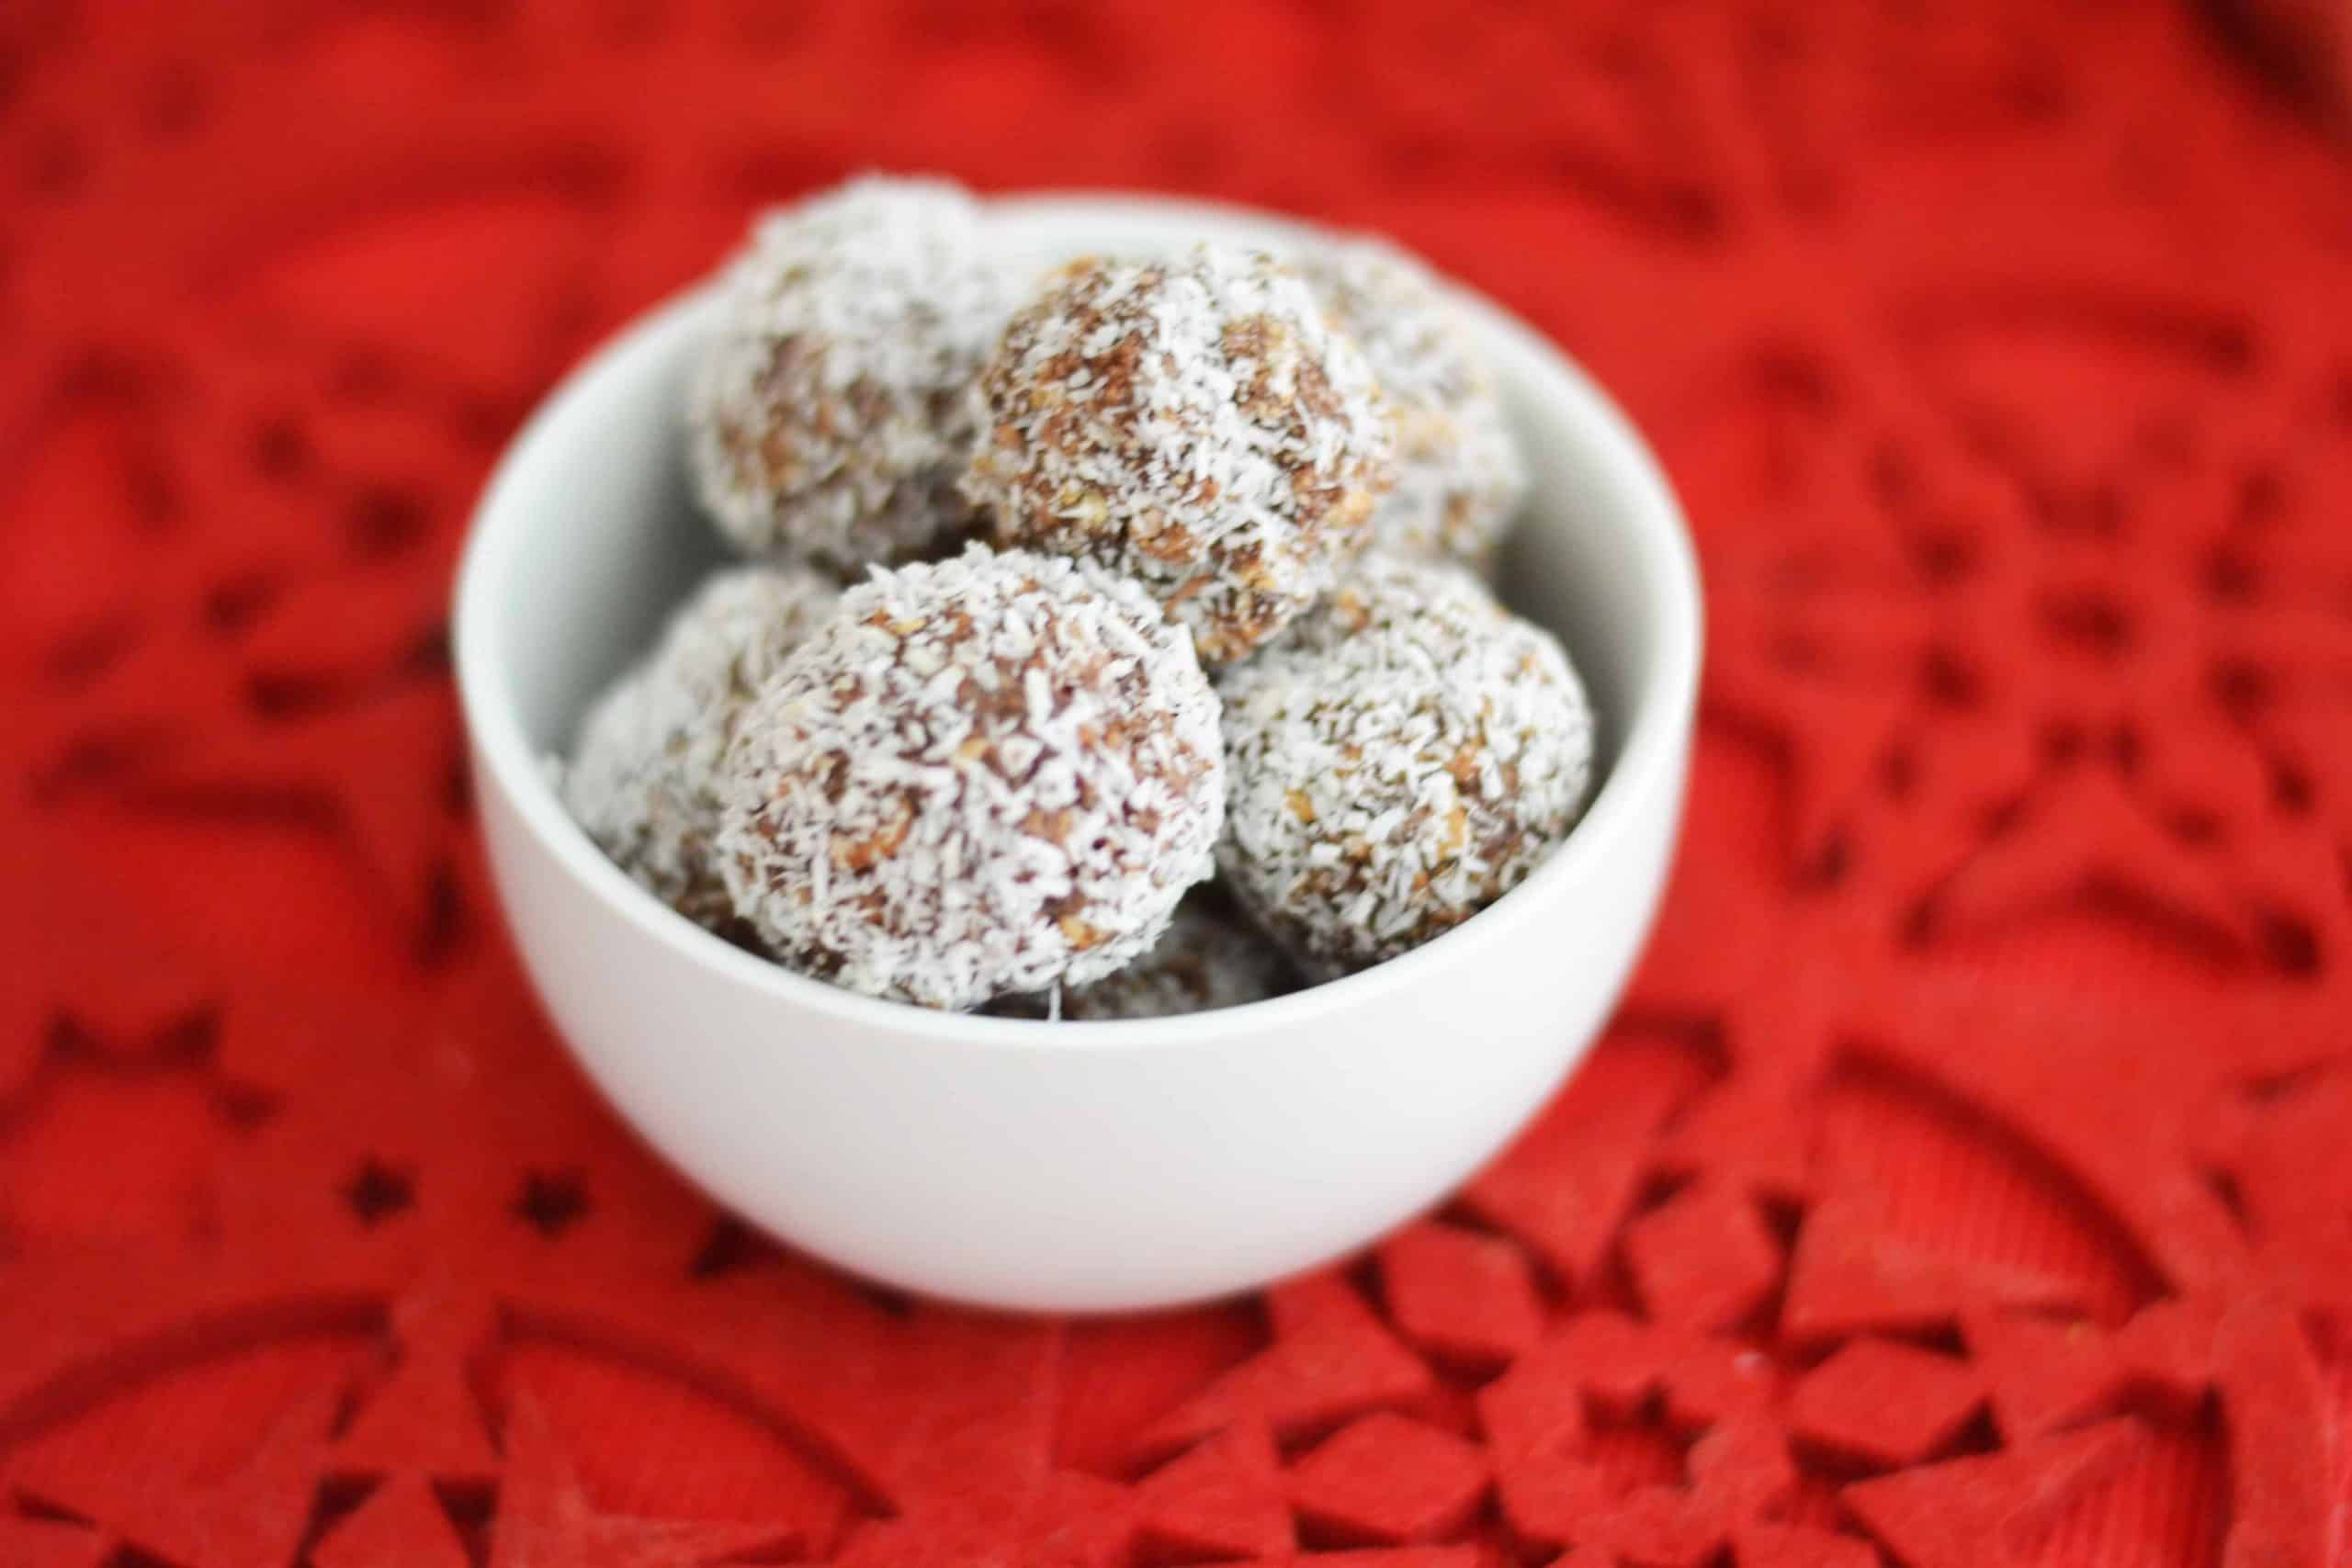 Simple Rum Balls Recipe with only 5 ingredients